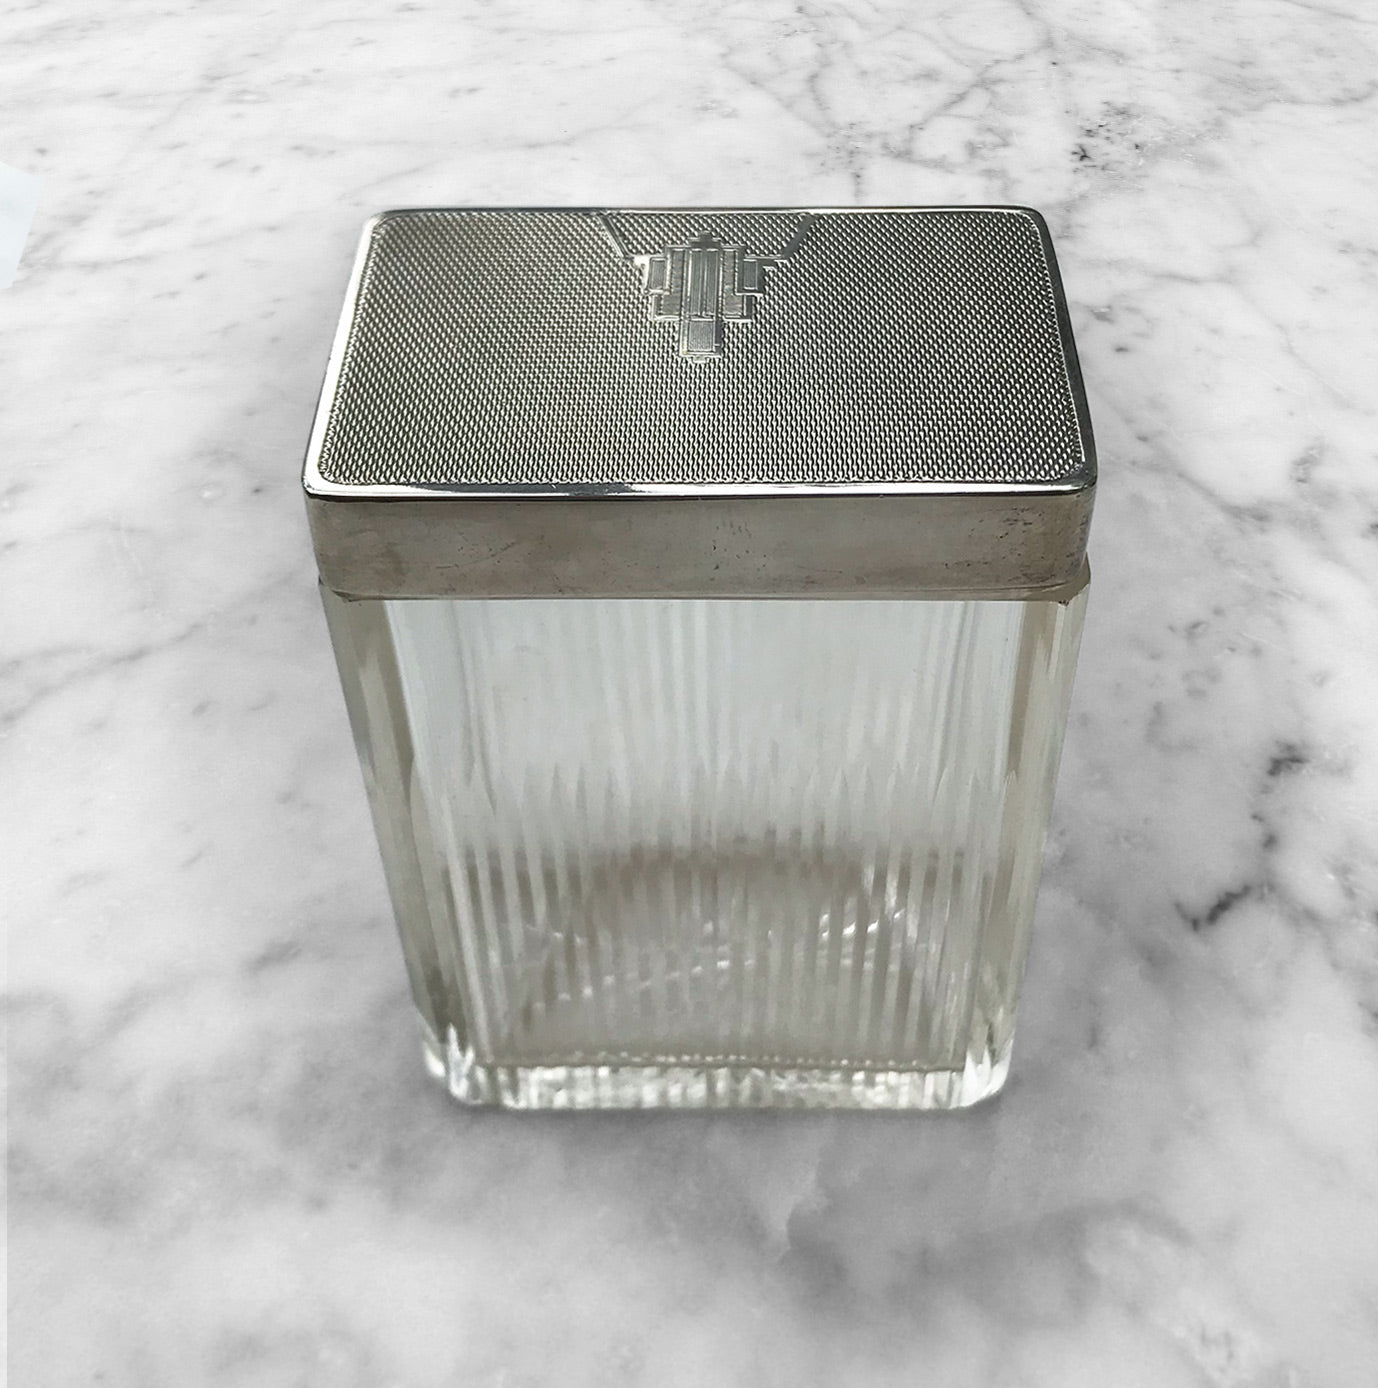 1935 Art Deco English hallmarked solid silver and cut glass rectangular dressing table or soap jar by William Neale of Birmingham.Superior quality with large heavy weight engraved Art Deco motif silver top with a gilt interior - SHOP NOW - www.intovintage.co.uk